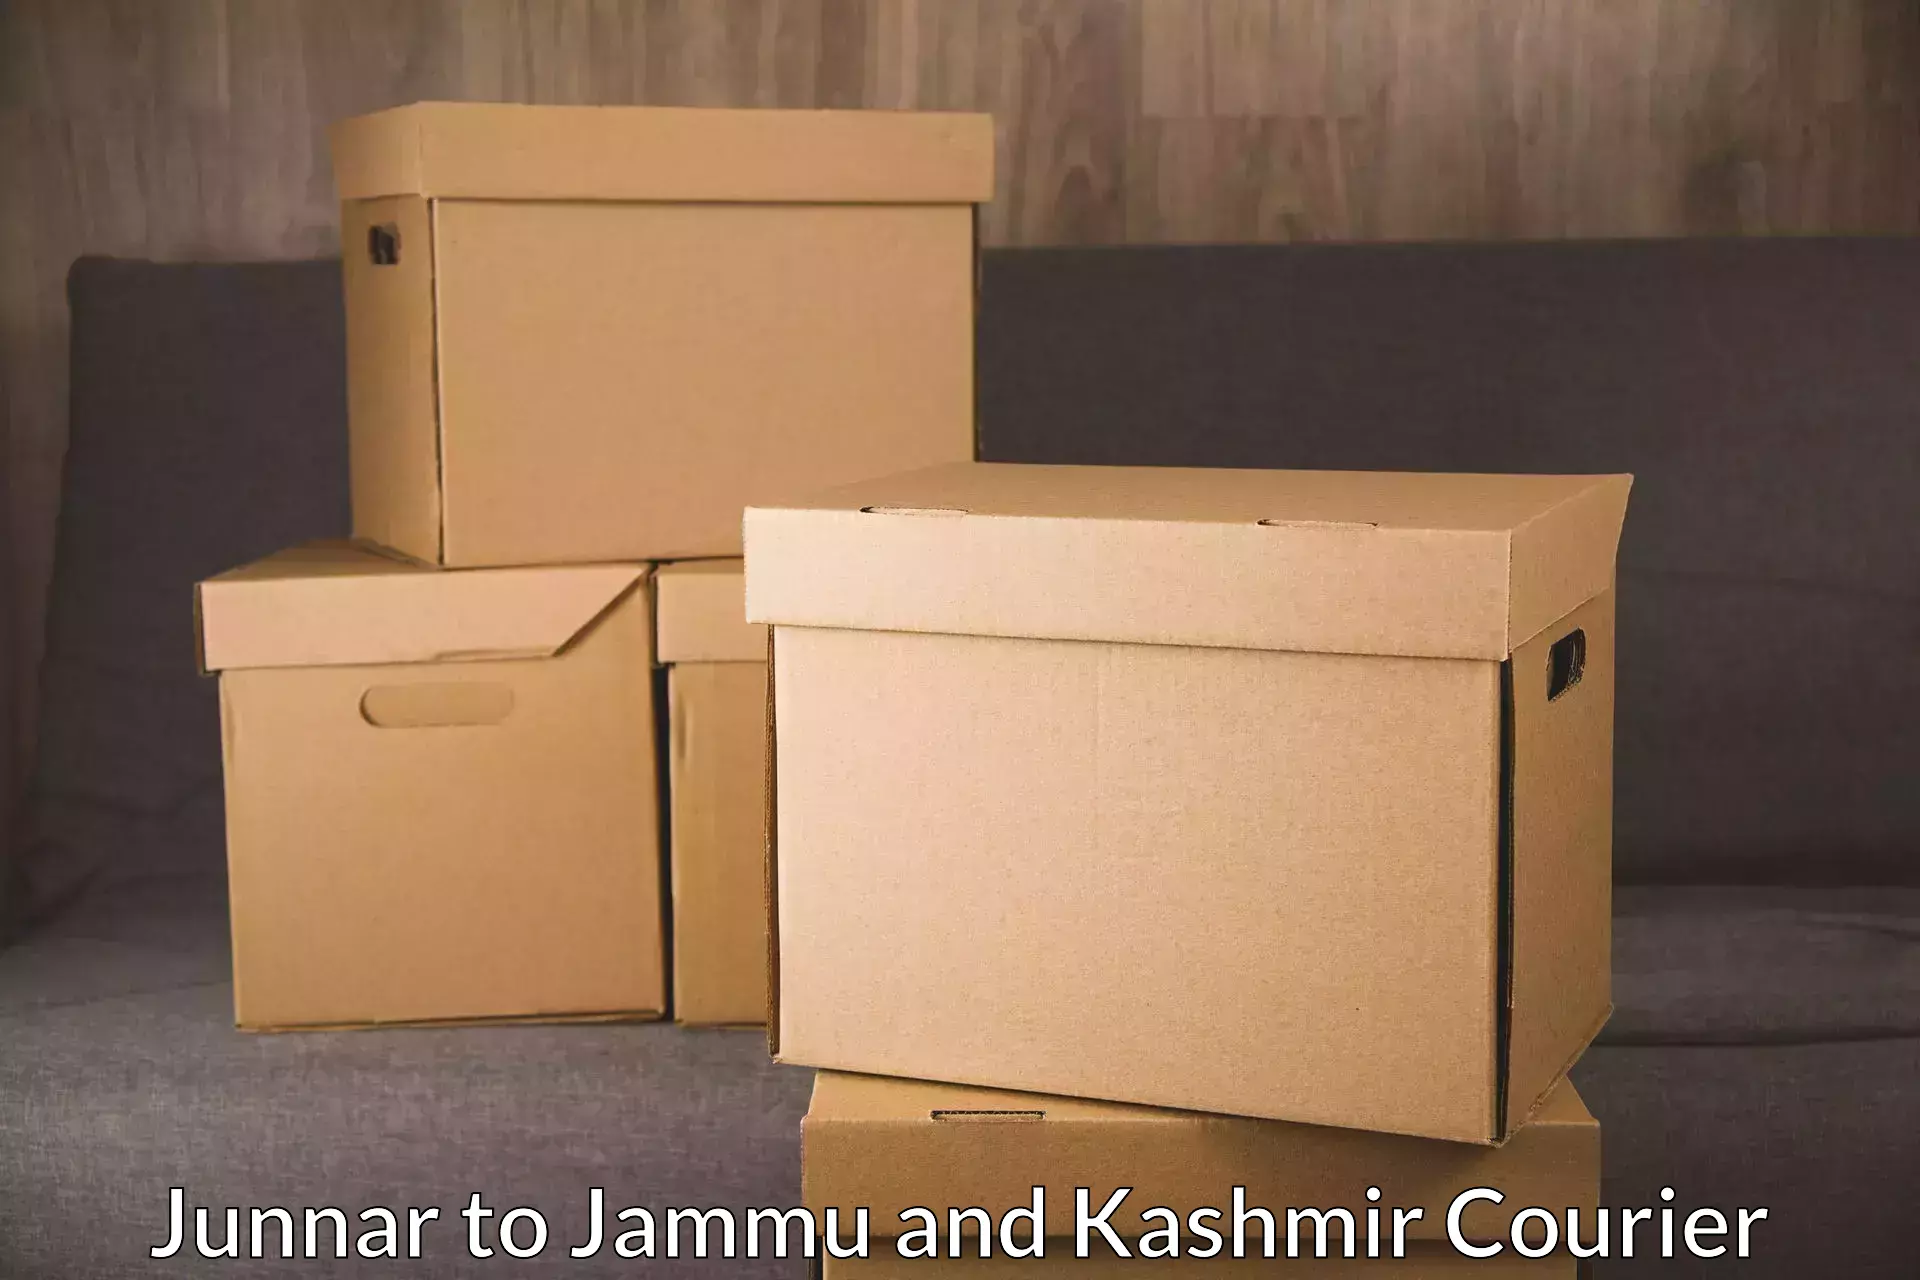 International courier networks Junnar to Bhaderwah